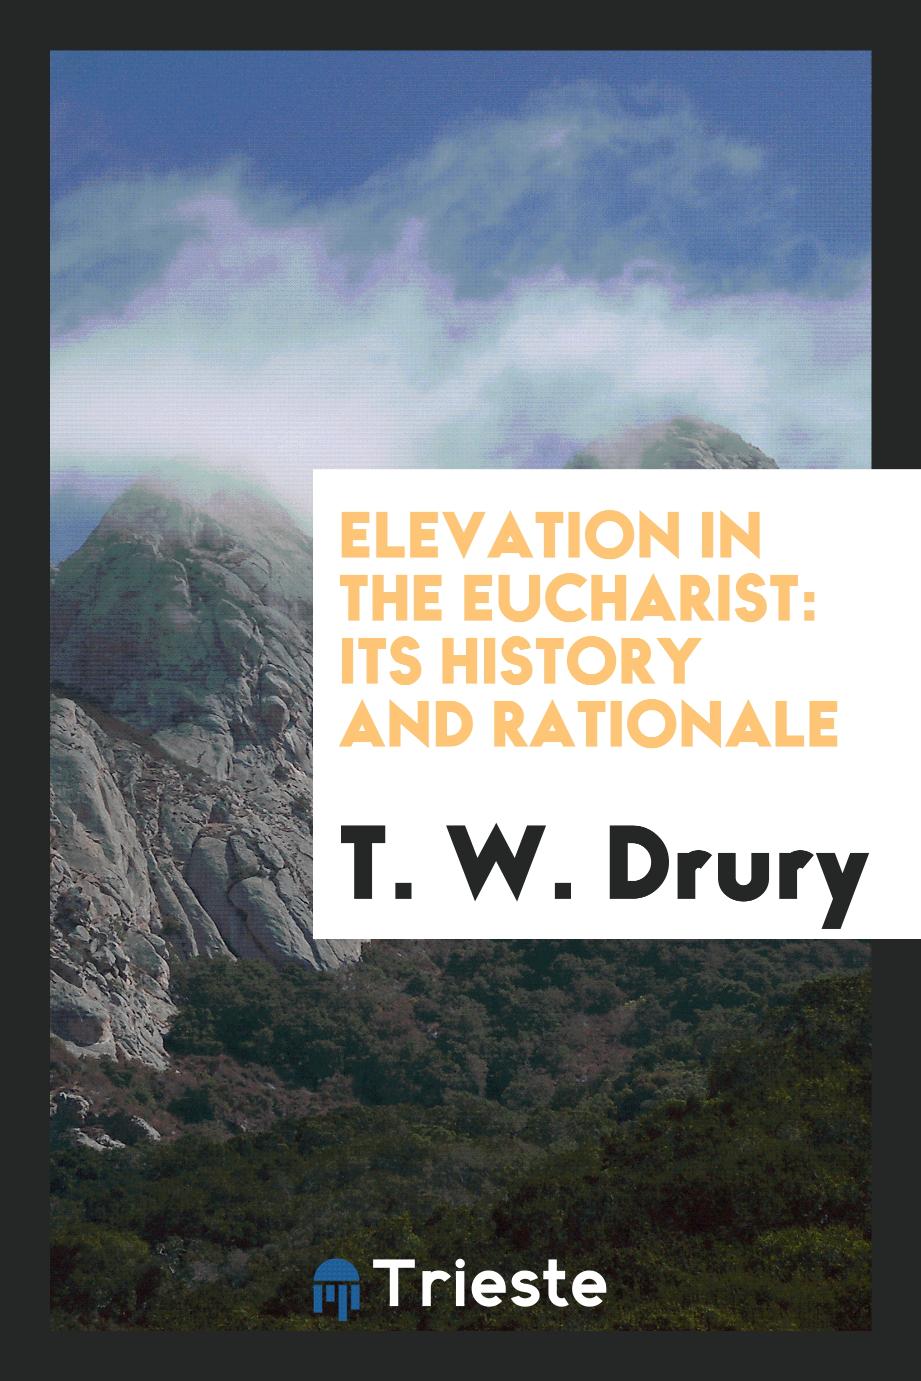 T. W. Drury - Elevation in the Eucharist: Its History and Rationale